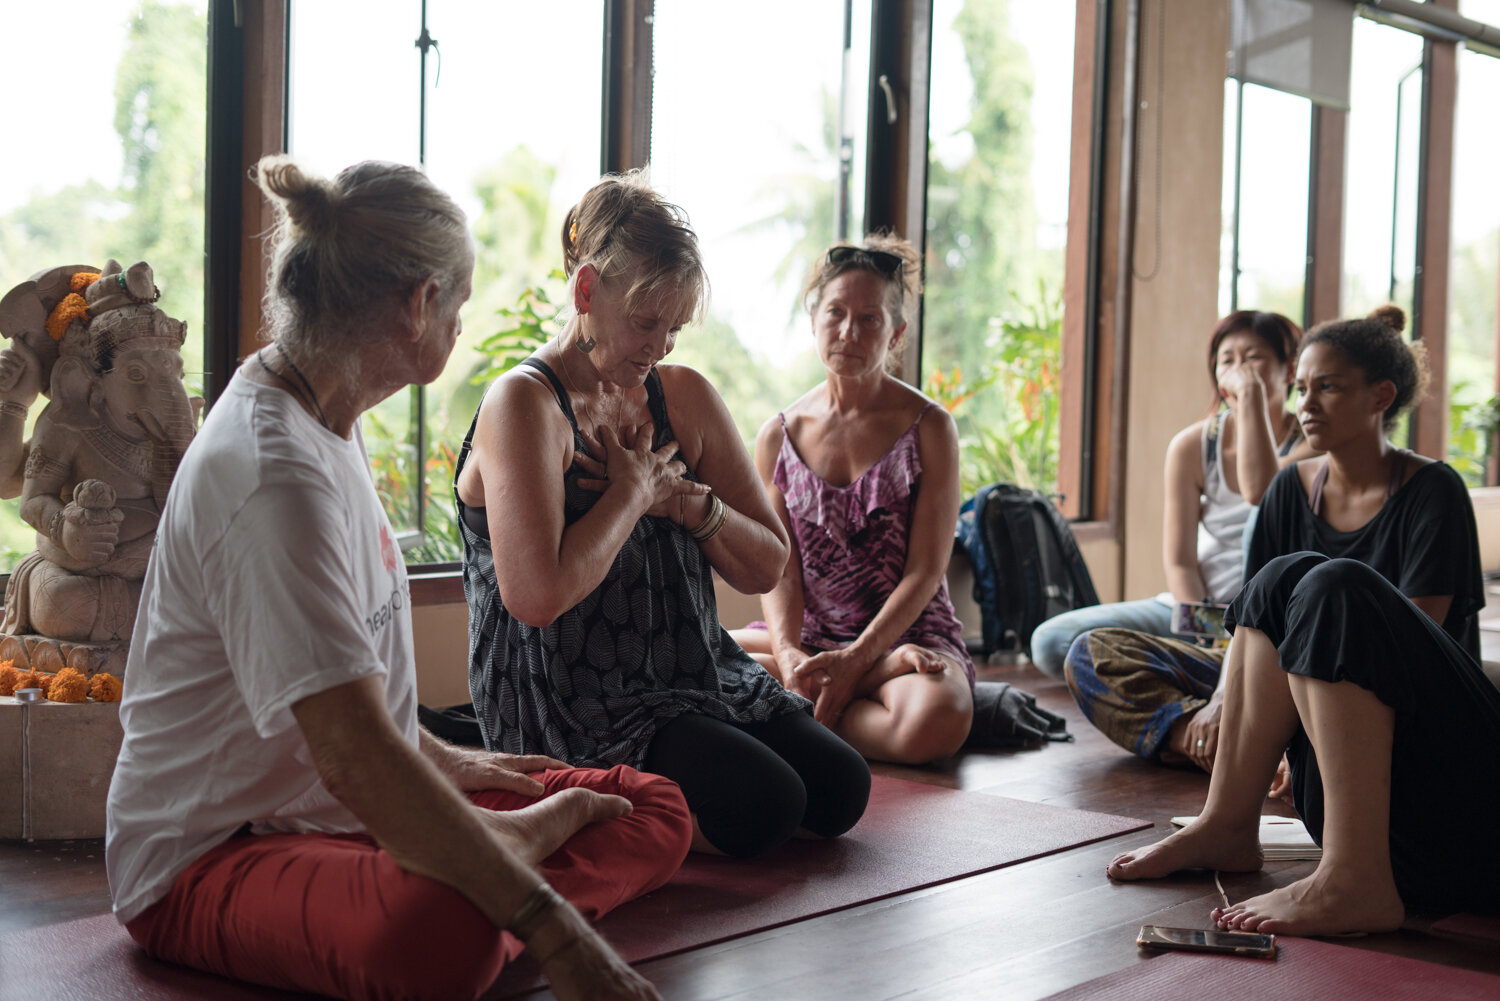 Heart of Yoga Studio with Mark Whitwell & Friends